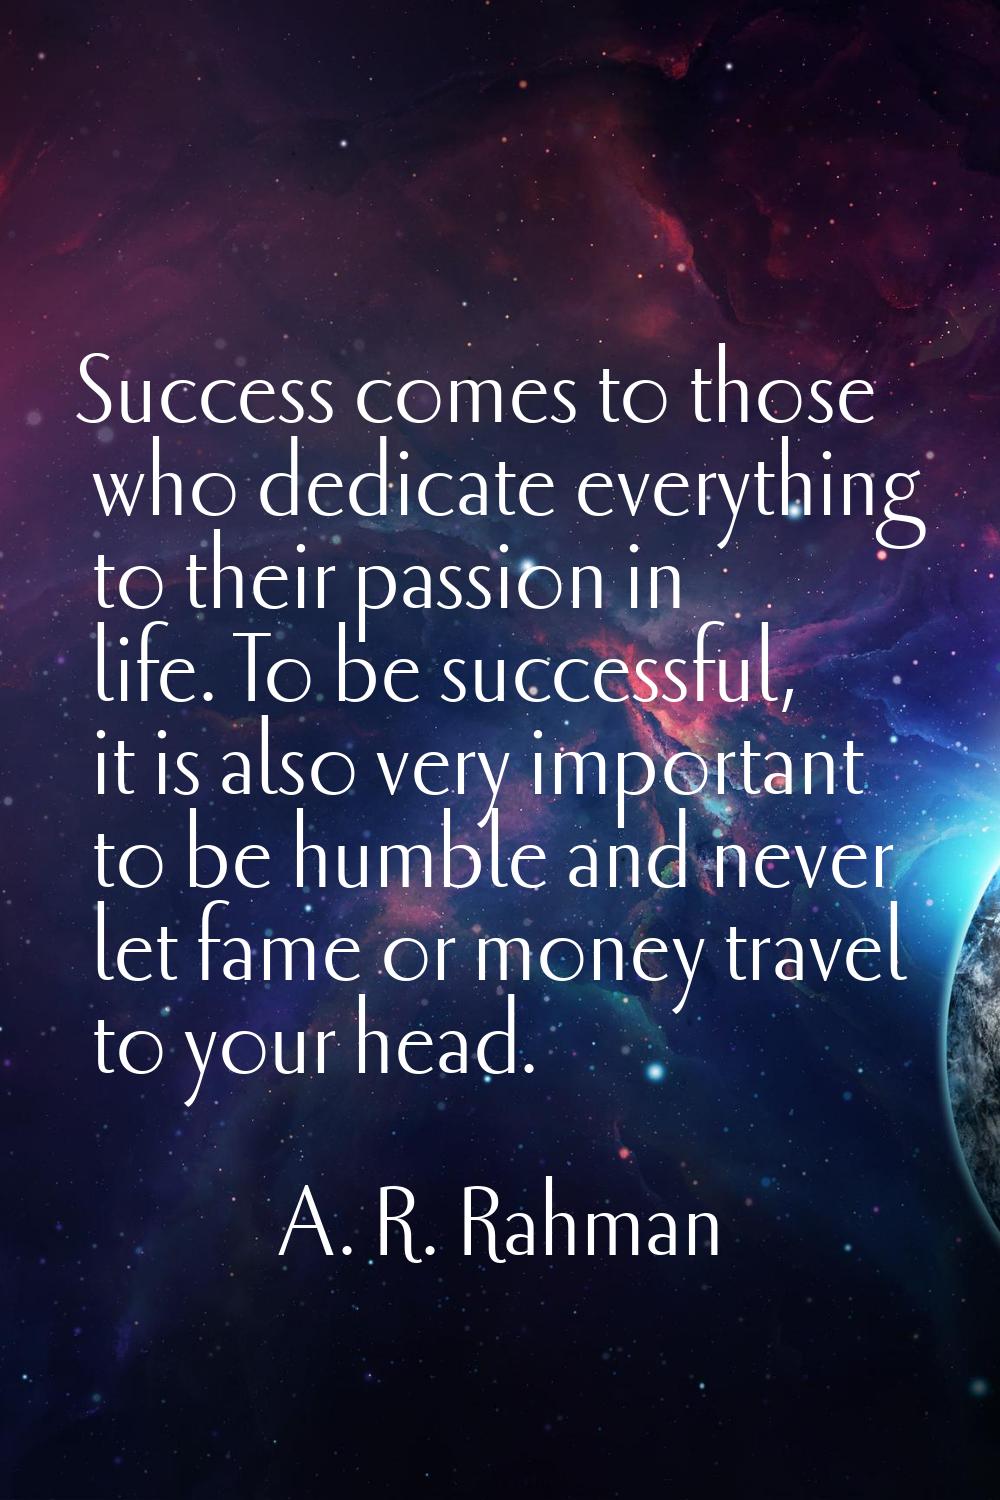 Success comes to those who dedicate everything to their passion in life. To be successful, it is al